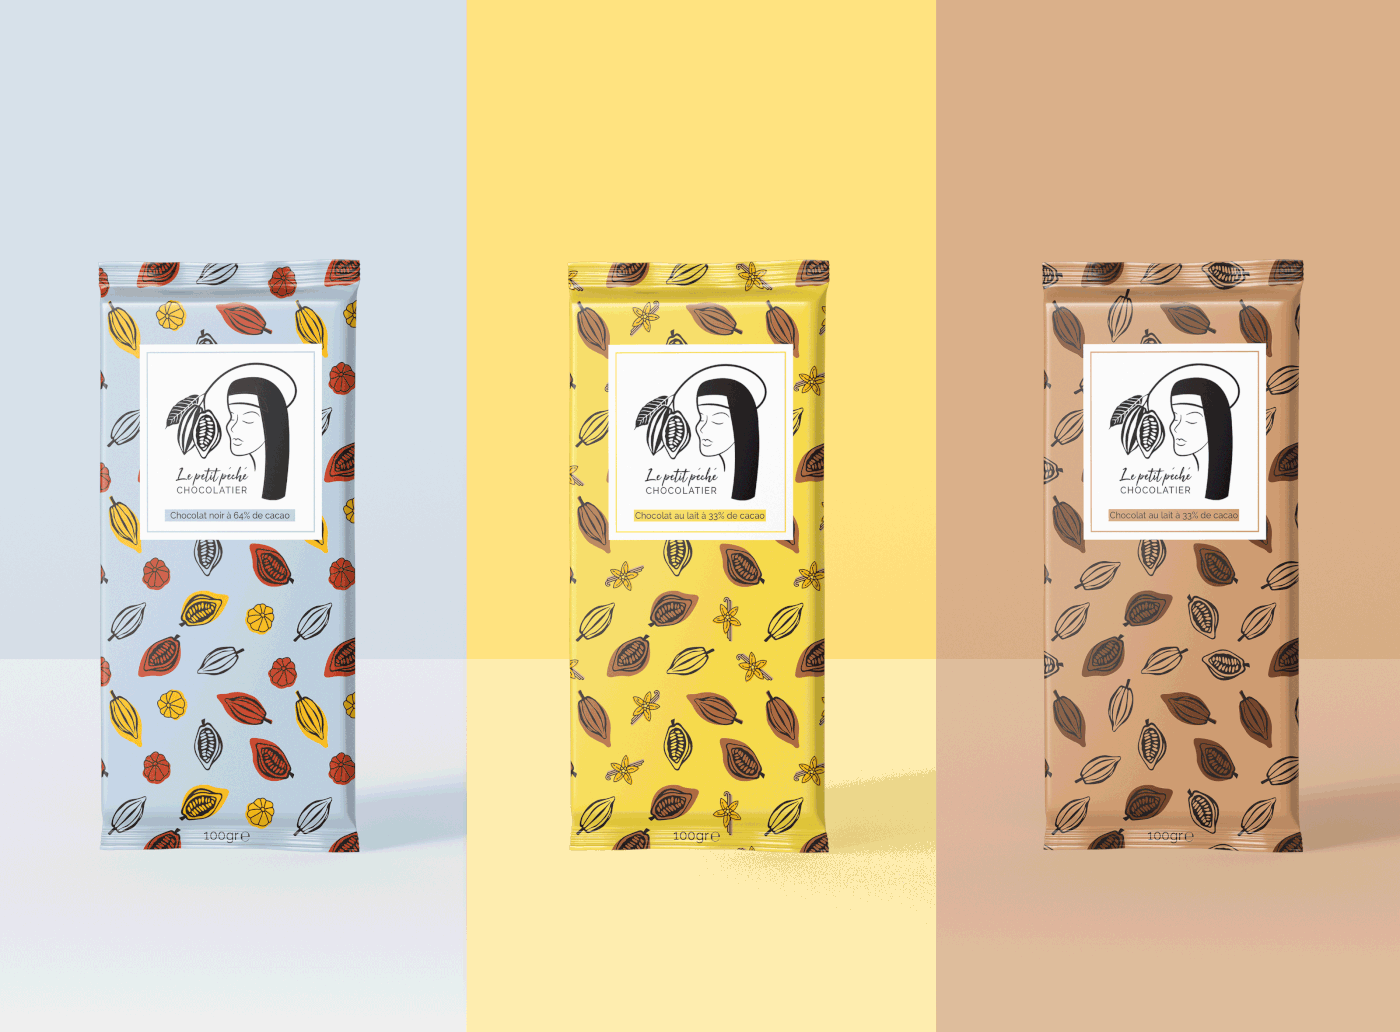 ILLUSTRATION  Packaging marque branding  graphic design  Emballages chocolat chocolate graphisme